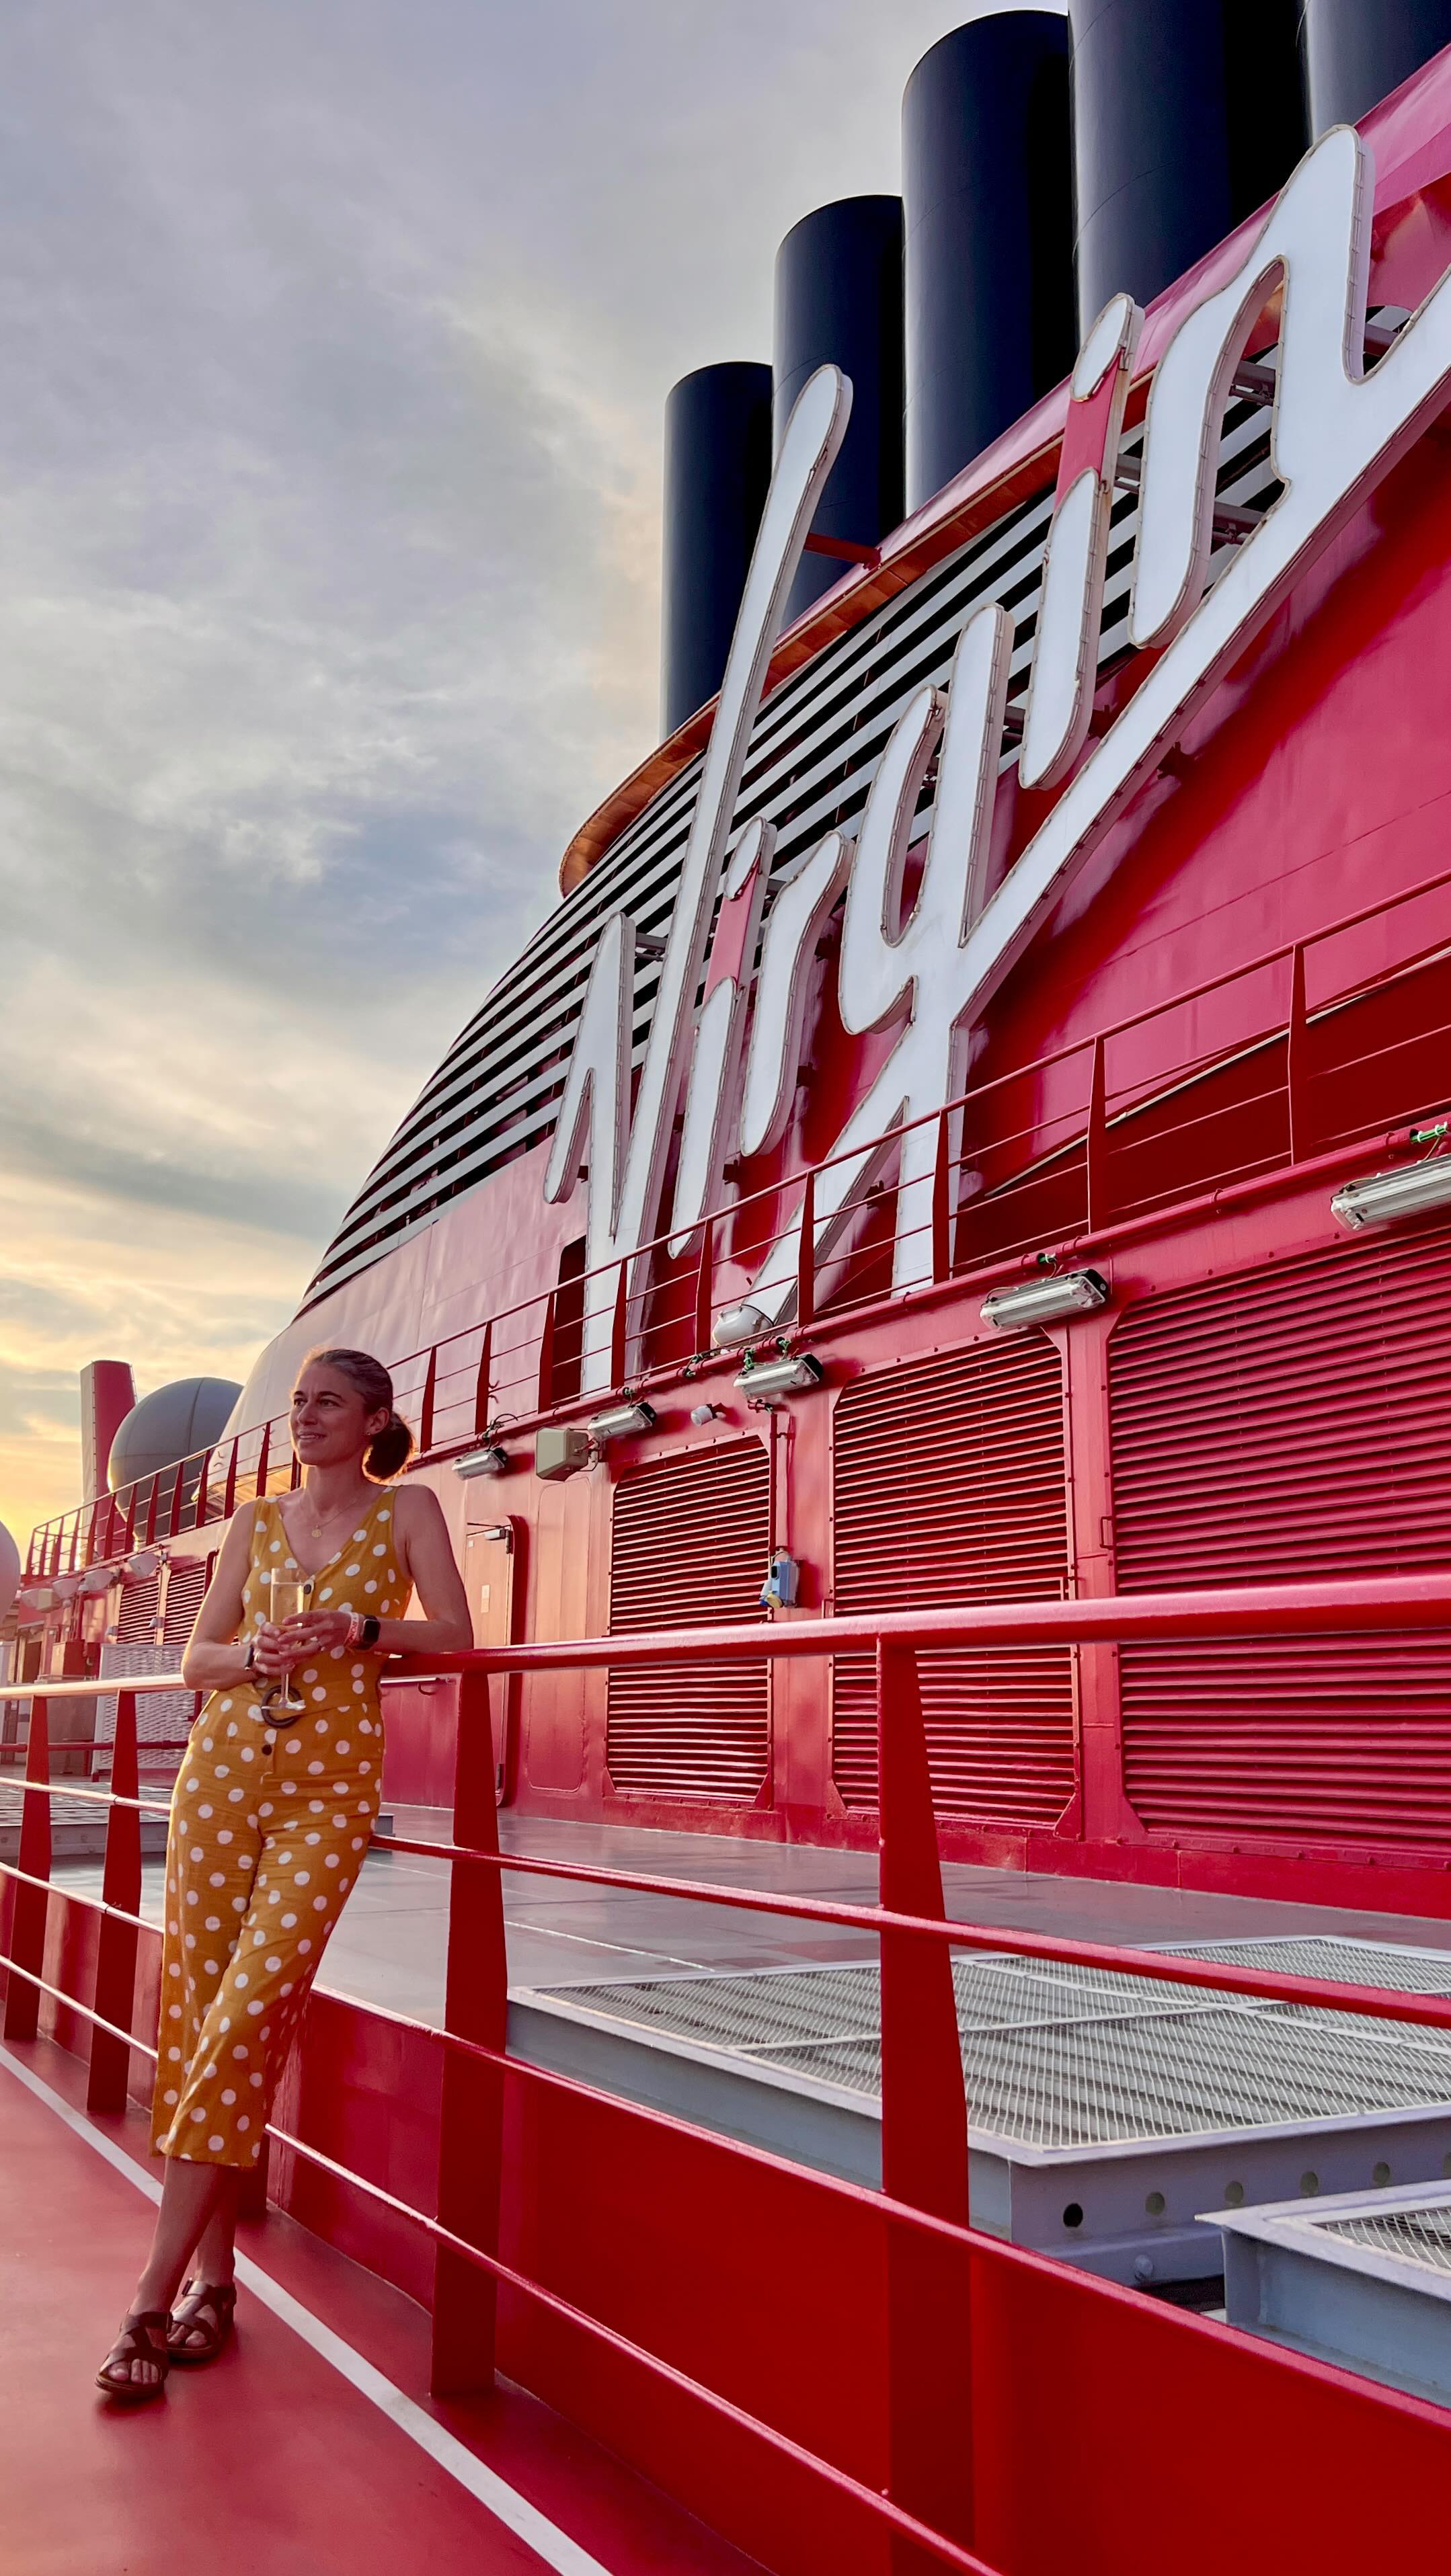 ⁣
The @virginvoyages Splash of Romance package is everything your couples escapade could ask for:⁣
⁣
🍾 a bottle of Moët⁣
🍊 daily juices in your cabin⁣
🍫 aphrodisiac snacks delivered ⁣
🧖🏽‍♀️ a 3-hour spa pass ⁣
🚢 sail-away from Richard’s Rooftop with happy hour champagne ⁣
⁣
A $400 value priced at $200. ⁣
⁣
⏳ Book it soon if interested - only 50 packages available per sailing! ⁣
⁣
♥️♥️♥️⁣
𝘓𝘰𝘵𝘴 𝘰𝘧 𝘭𝘰𝘷𝘦 𝘵𝘰 𝘢𝘭𝘭!

#virginvoyages #splashofromance